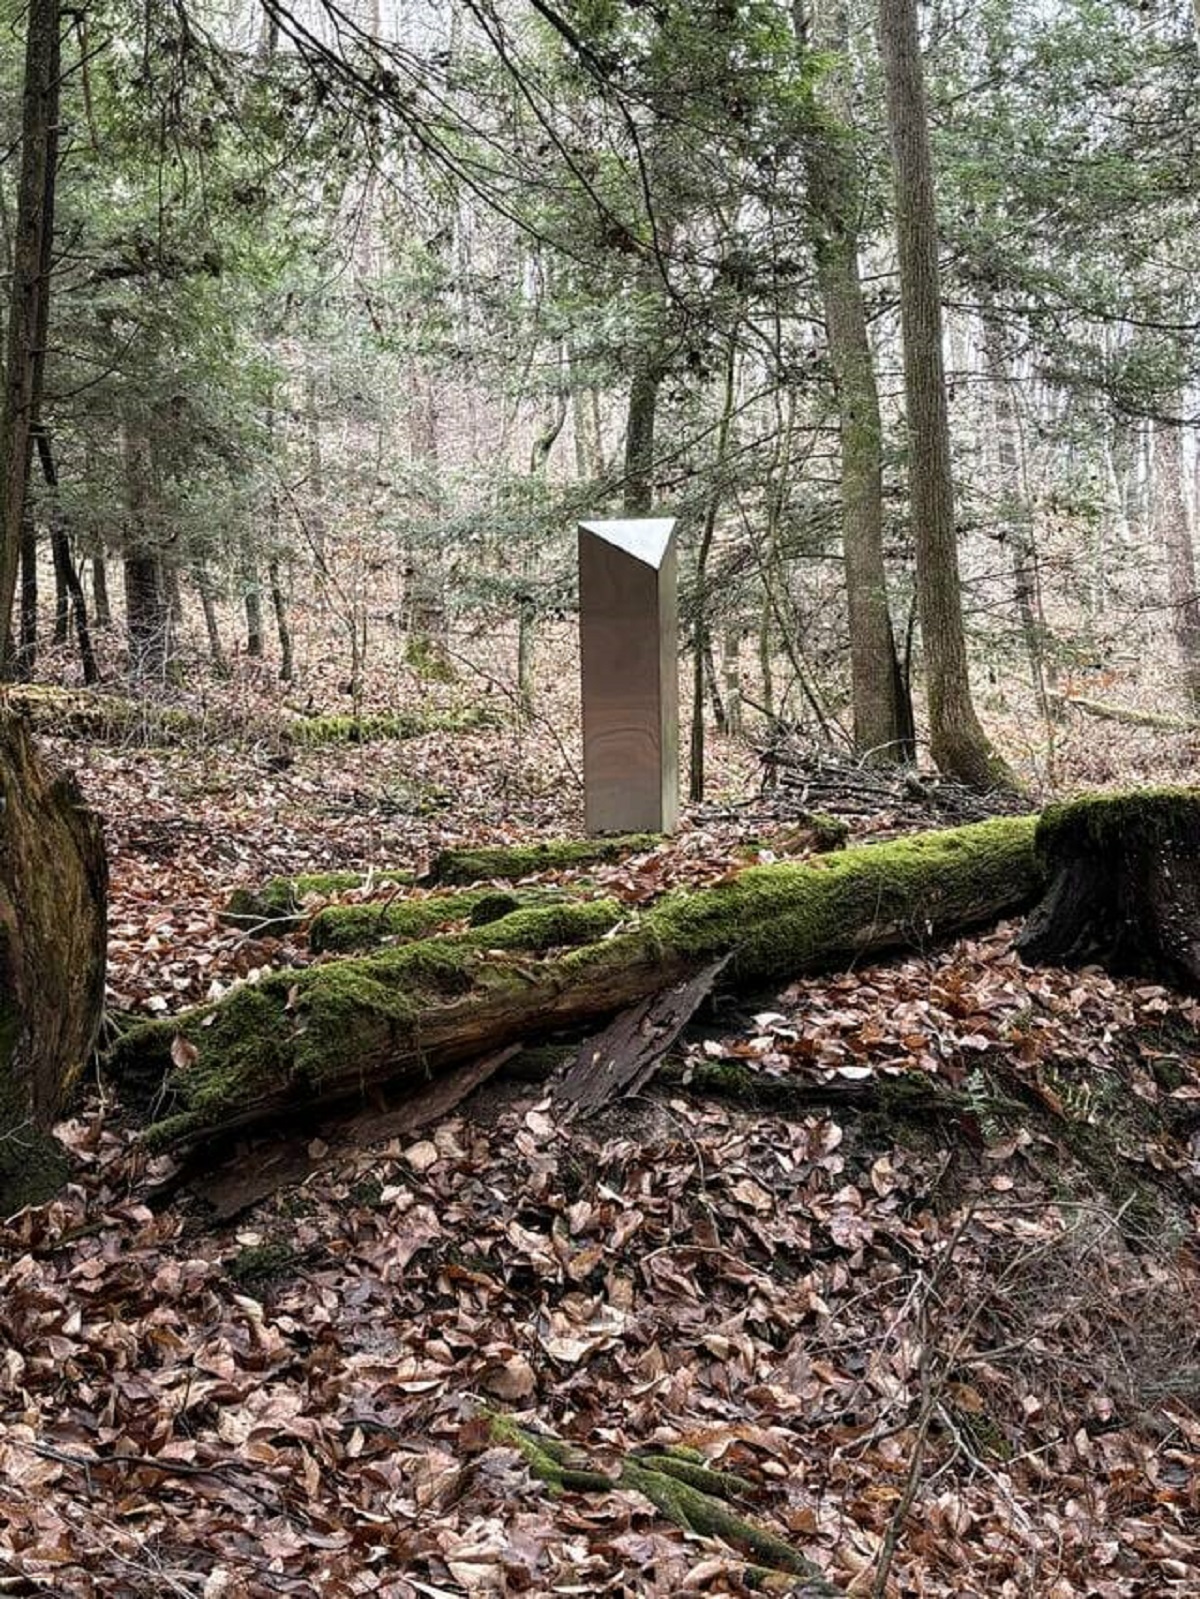 "Metal obelisk found in the middle of the woods"